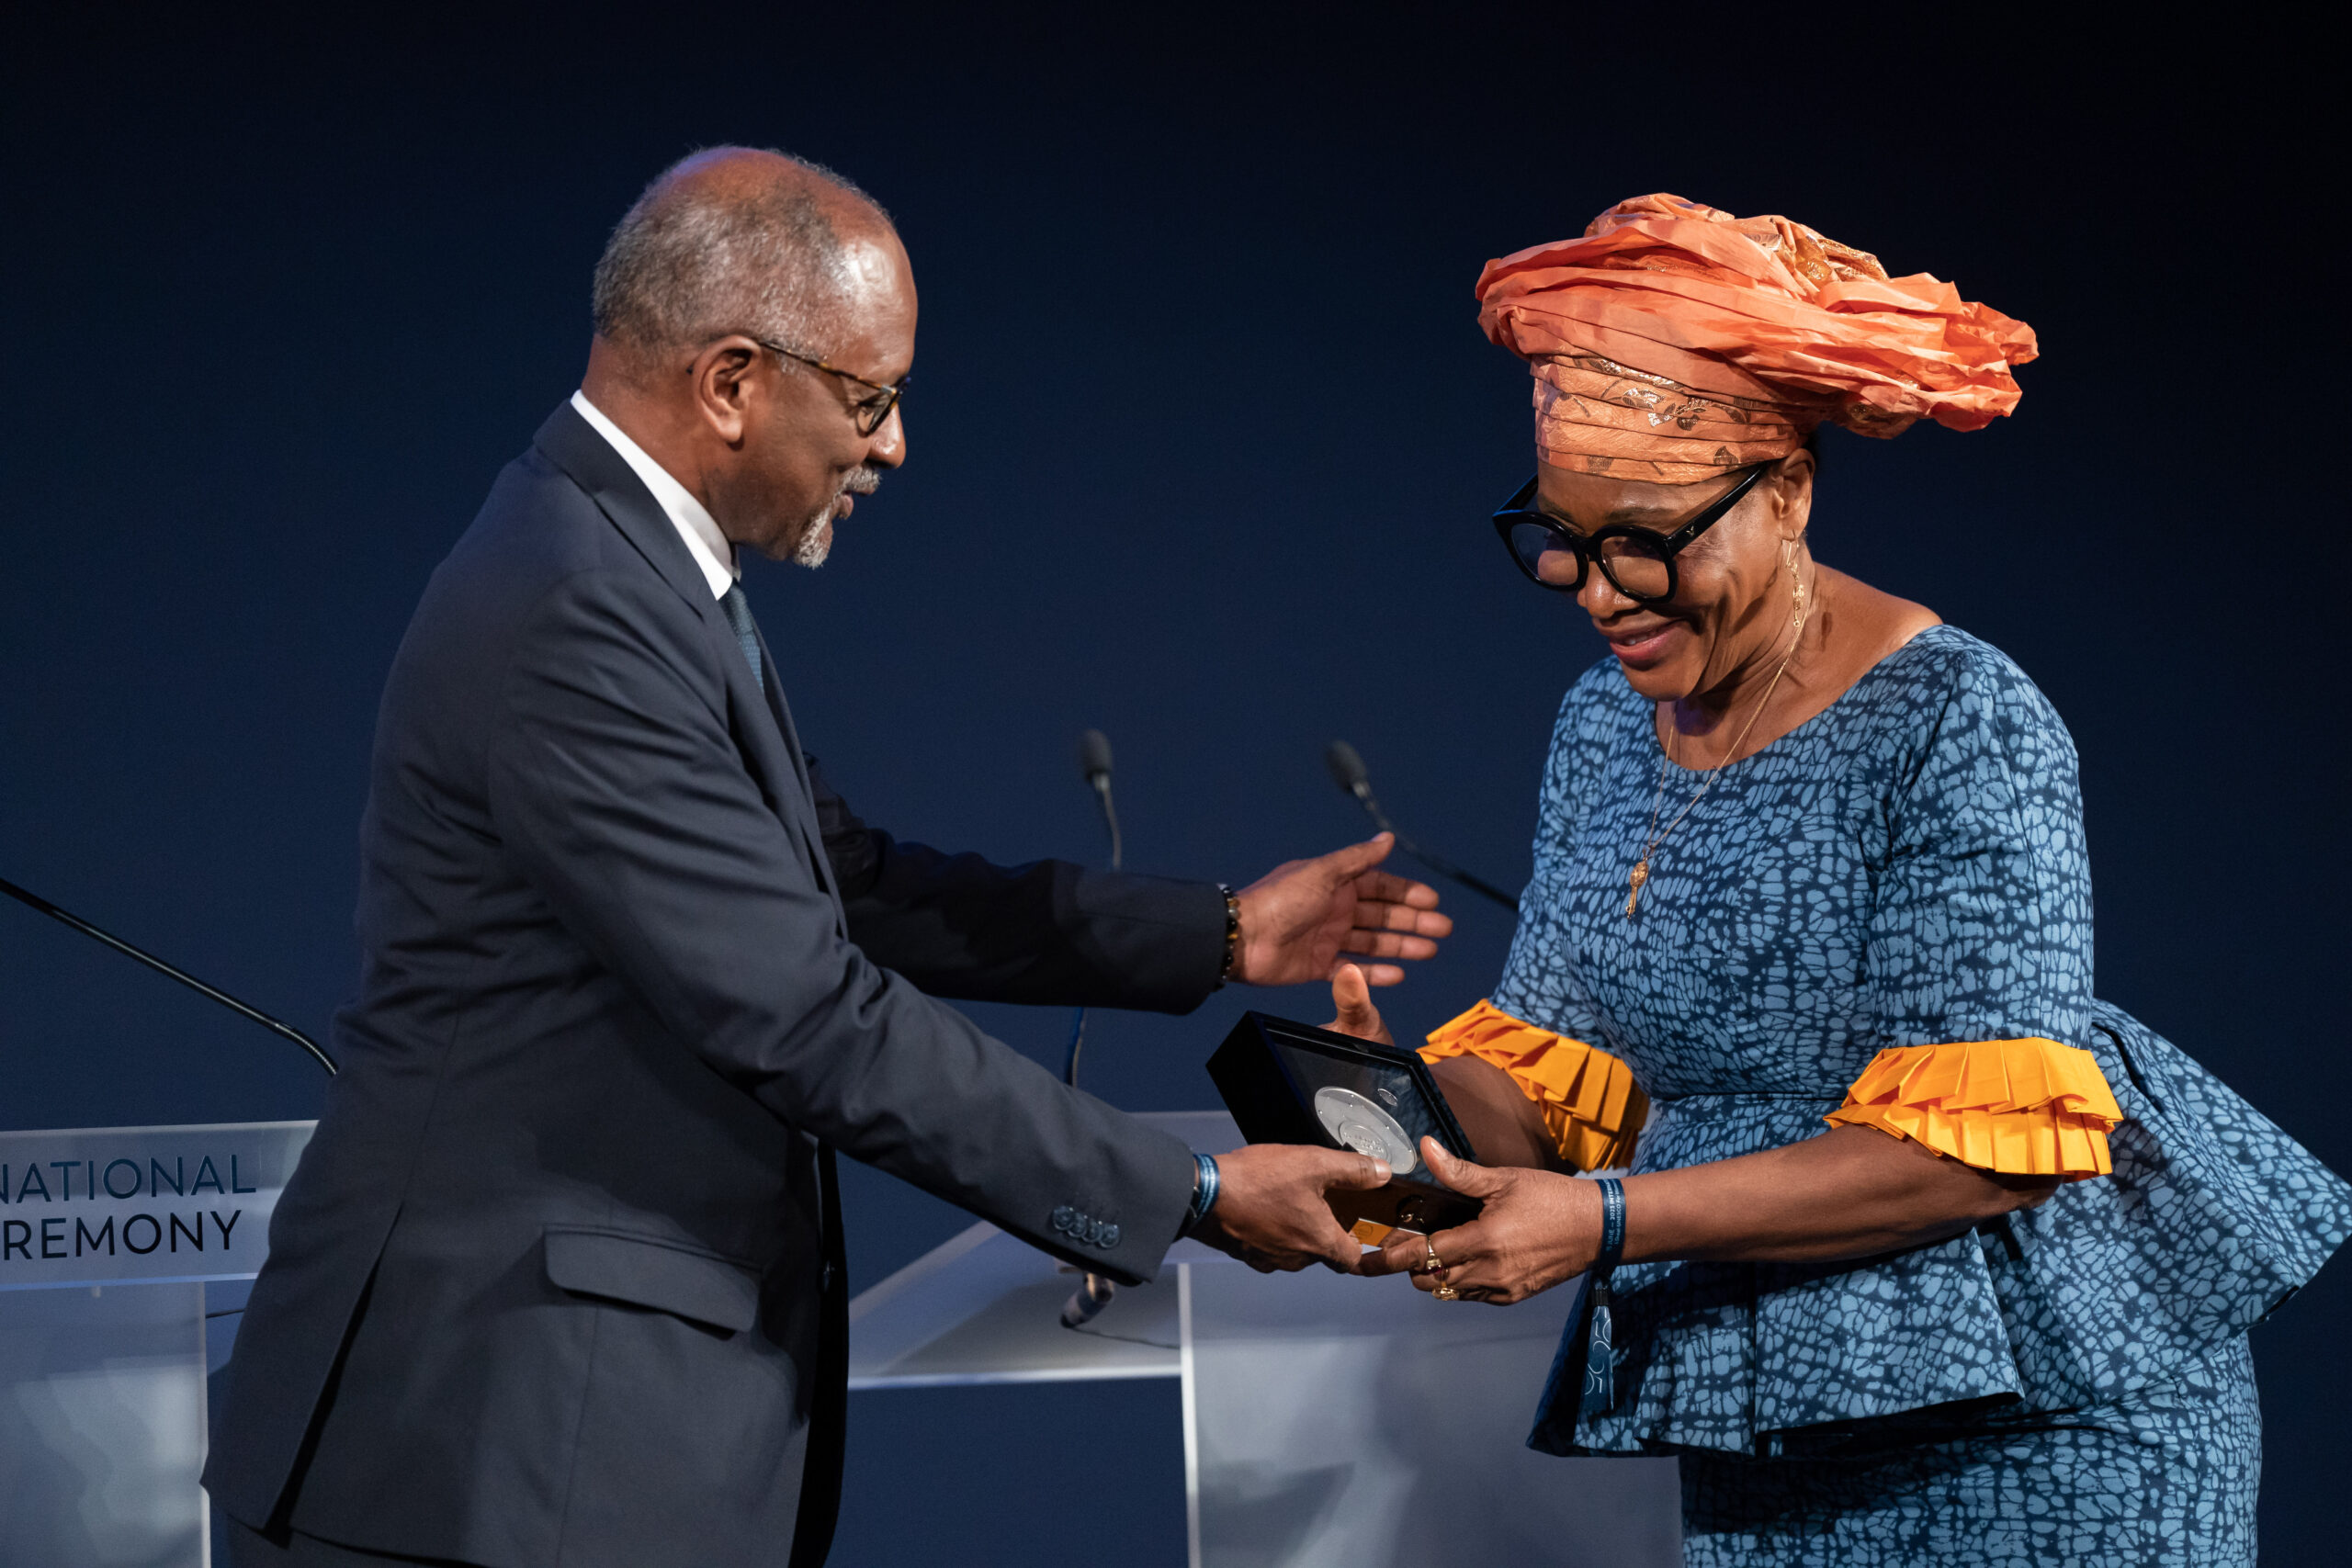 Dr. Marycelin Baba receives the L'Oréal-UNESCO Medal of Honor for Women Scientists from Firmin Edouard Matoko, Assistant Director-General for Priority Africa and External Relations of UNESCO.